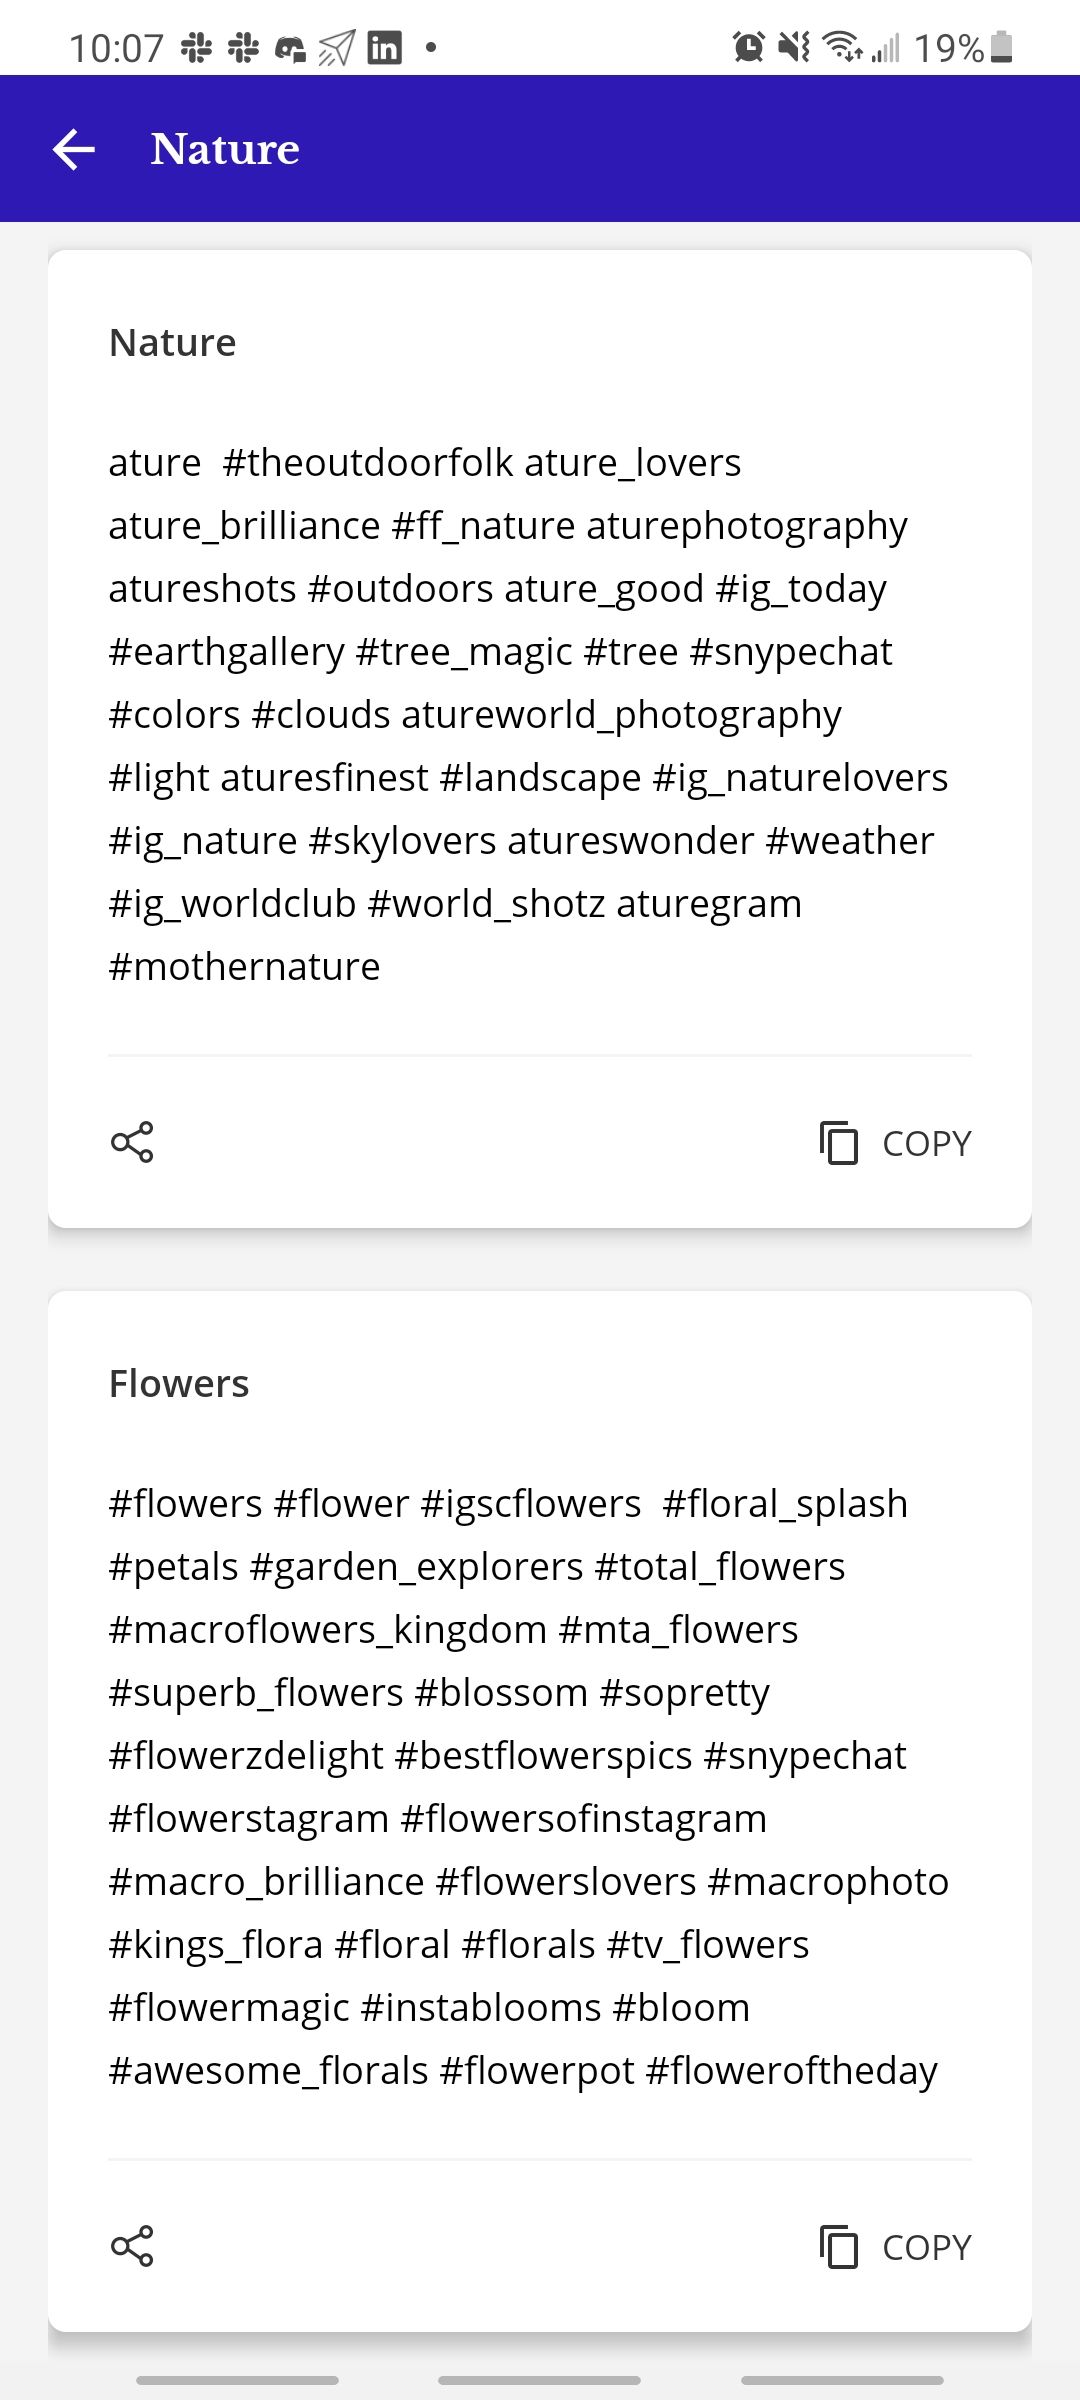 tagwag app examples of hashtags related to nature